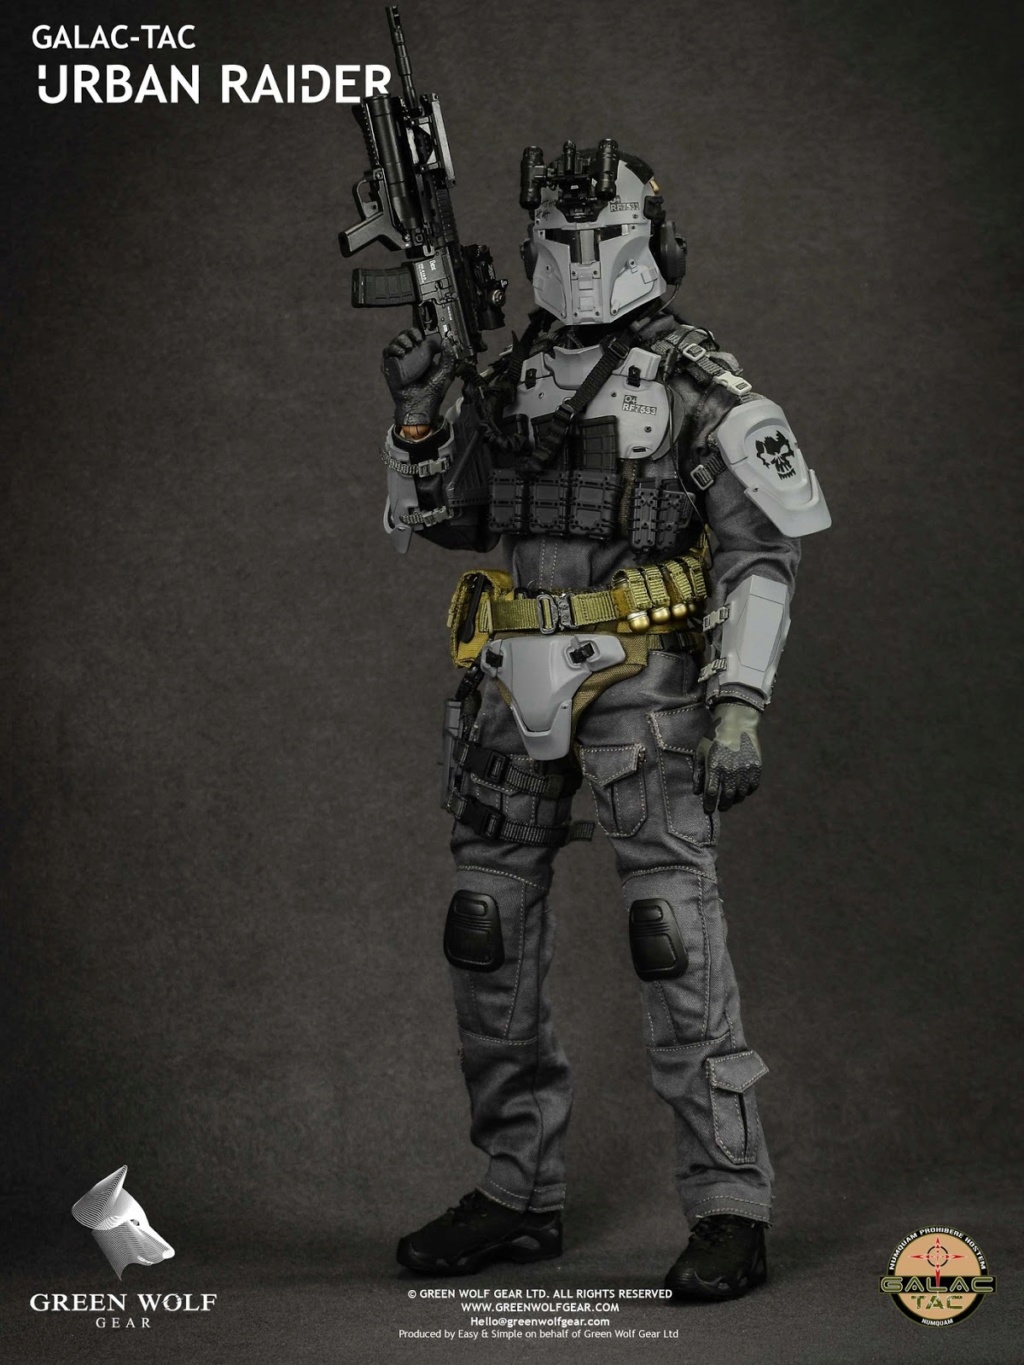 modernmilitary - NEW PRODUCT: Green Wolf Gear 1/6th scale GALAC-TAC Urban Raider 12-inch action figure 294